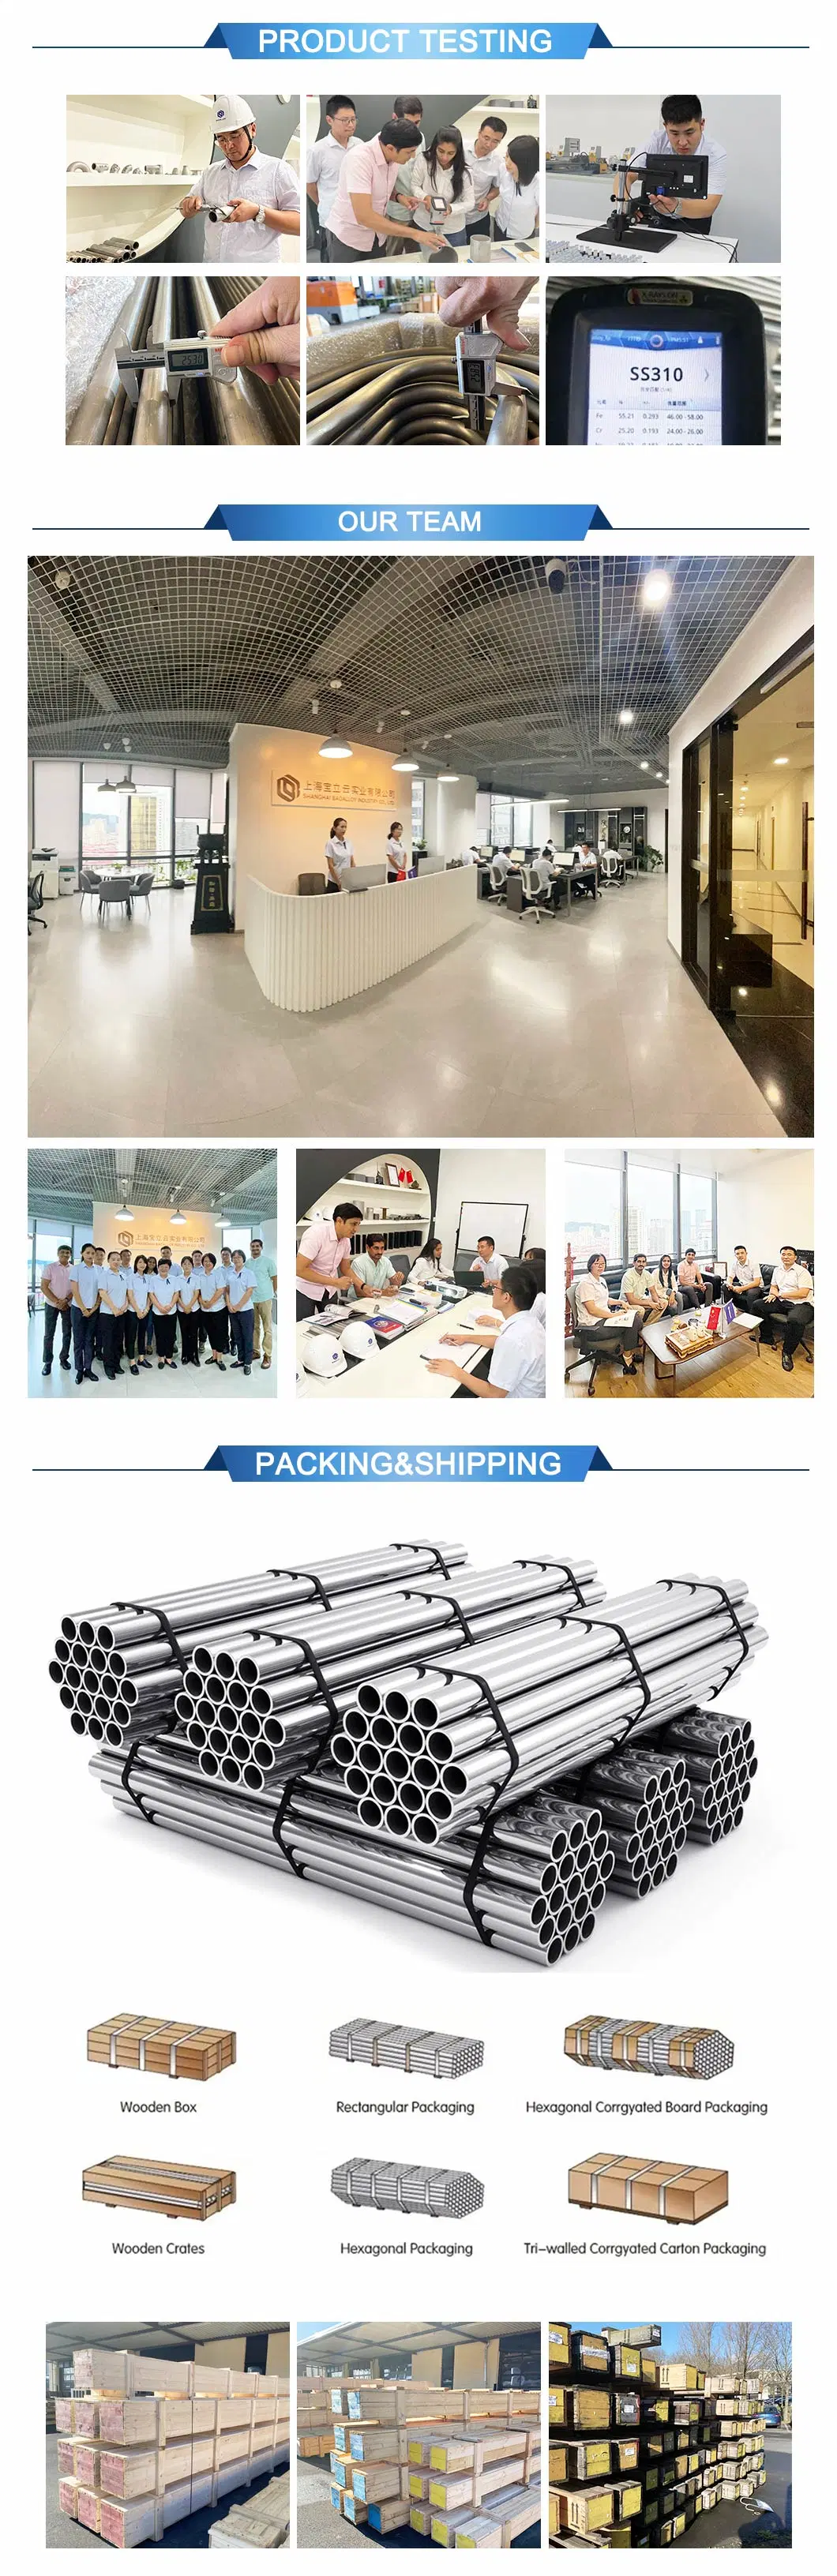 SUS304 1.4301 Round Pipe Stainless Steel Pipe Stainless Steel Tube 304 304L